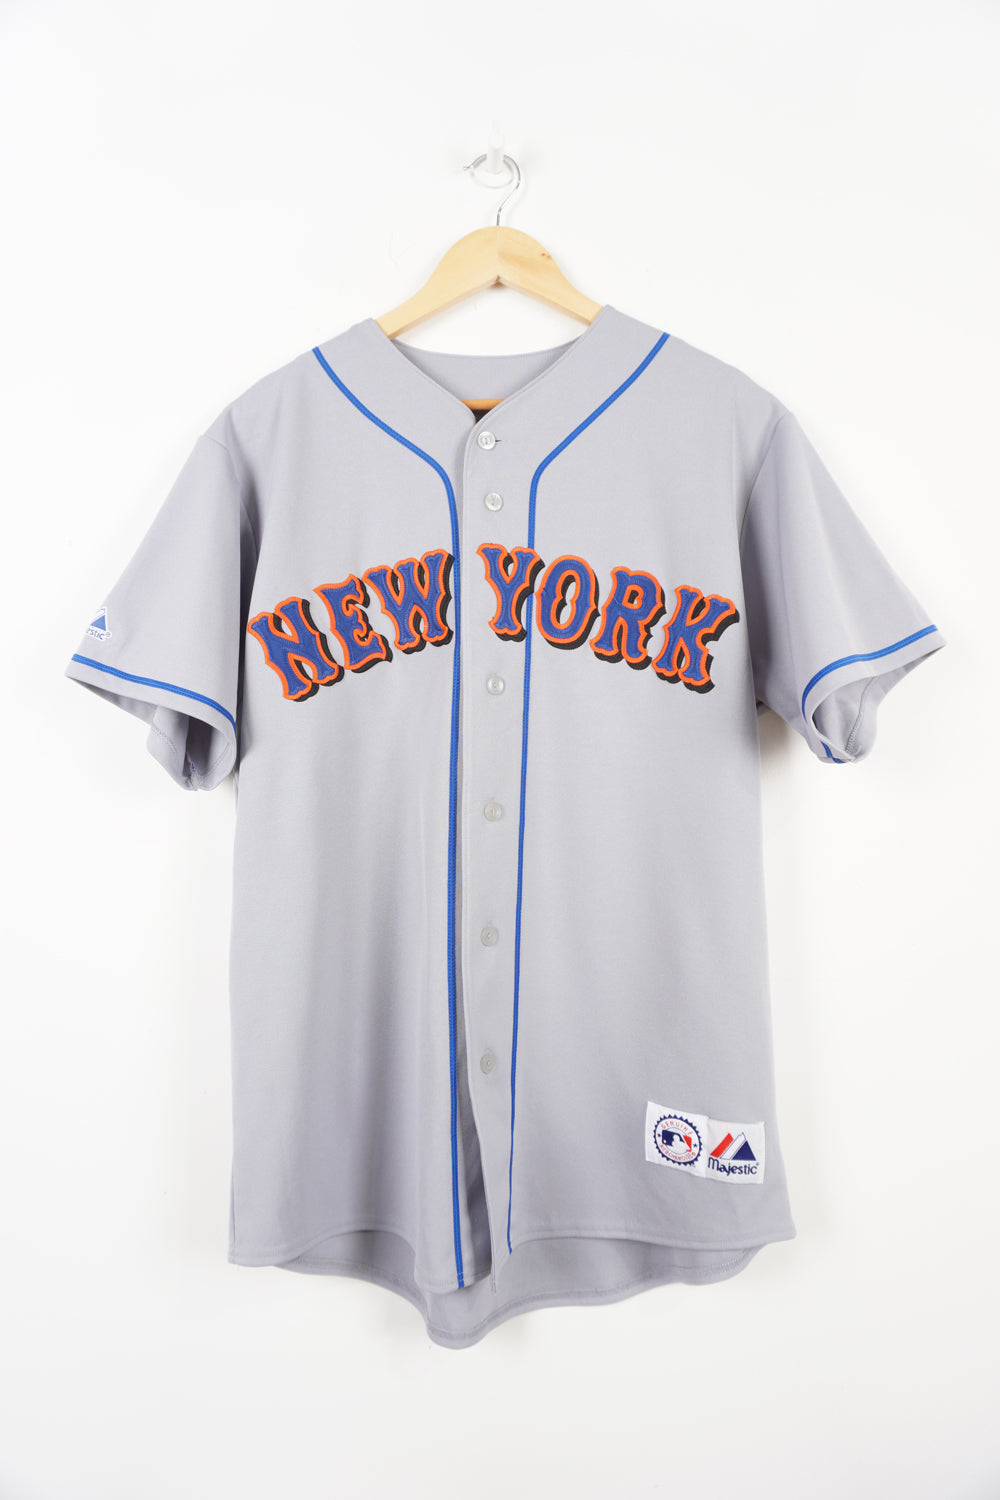 New York Mets All Star Game Gear, Mets All Star Game Jerseys, All